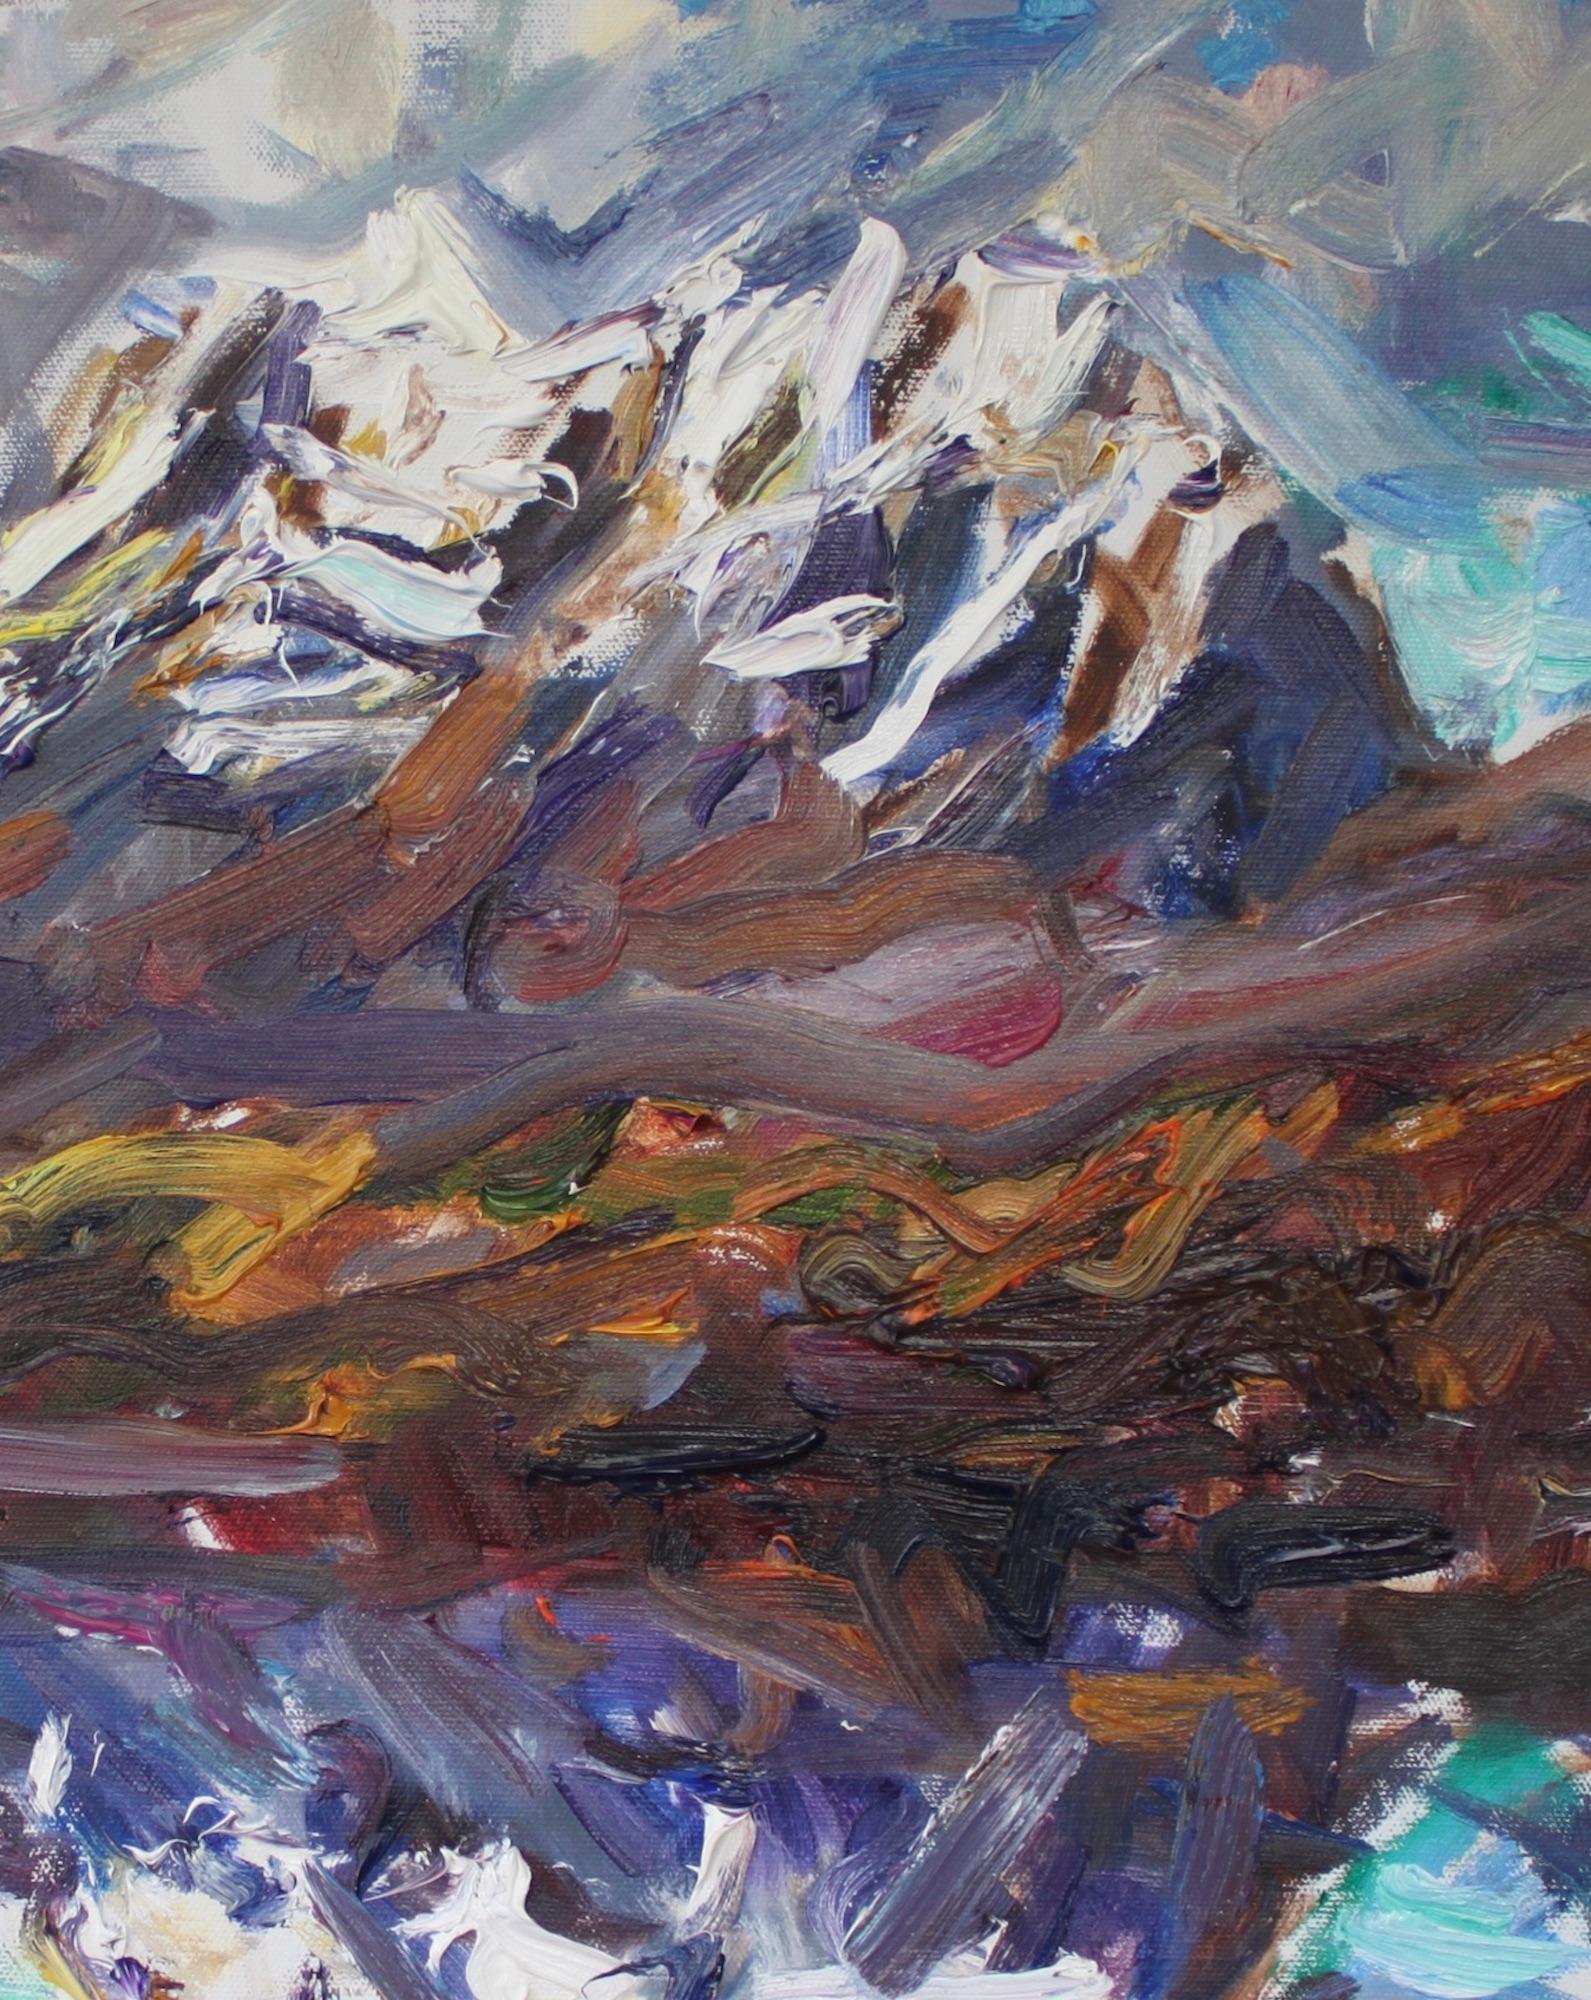 Liathach Reflection by Jonathan Shearer - Landscape oil painting, mountain, sky For Sale 3